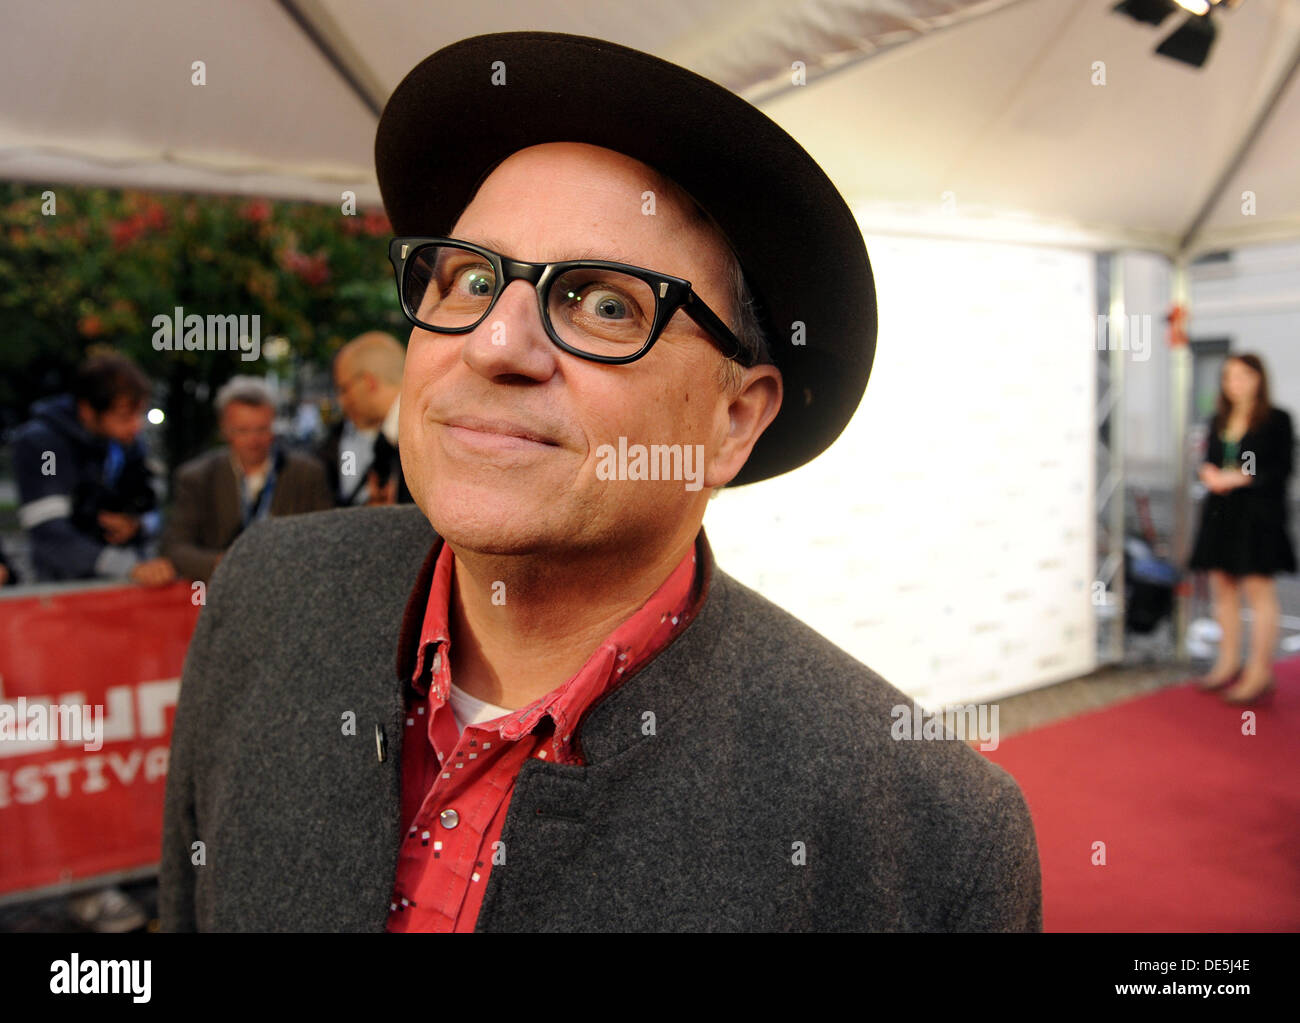 Oldenburg, Germany. 11th Sep, 2013. US actor and director, Bobcat Goldthwait, is a member of the jury of the Film Festival Oldenburg and arrives at its opening in Oldenburg, Germany, 11 September 2013. Cassel shall receive the Great Seal of the city of Oldenburg. Photo: Ingo Wagner/dpa/Alamy Live News Stock Photo